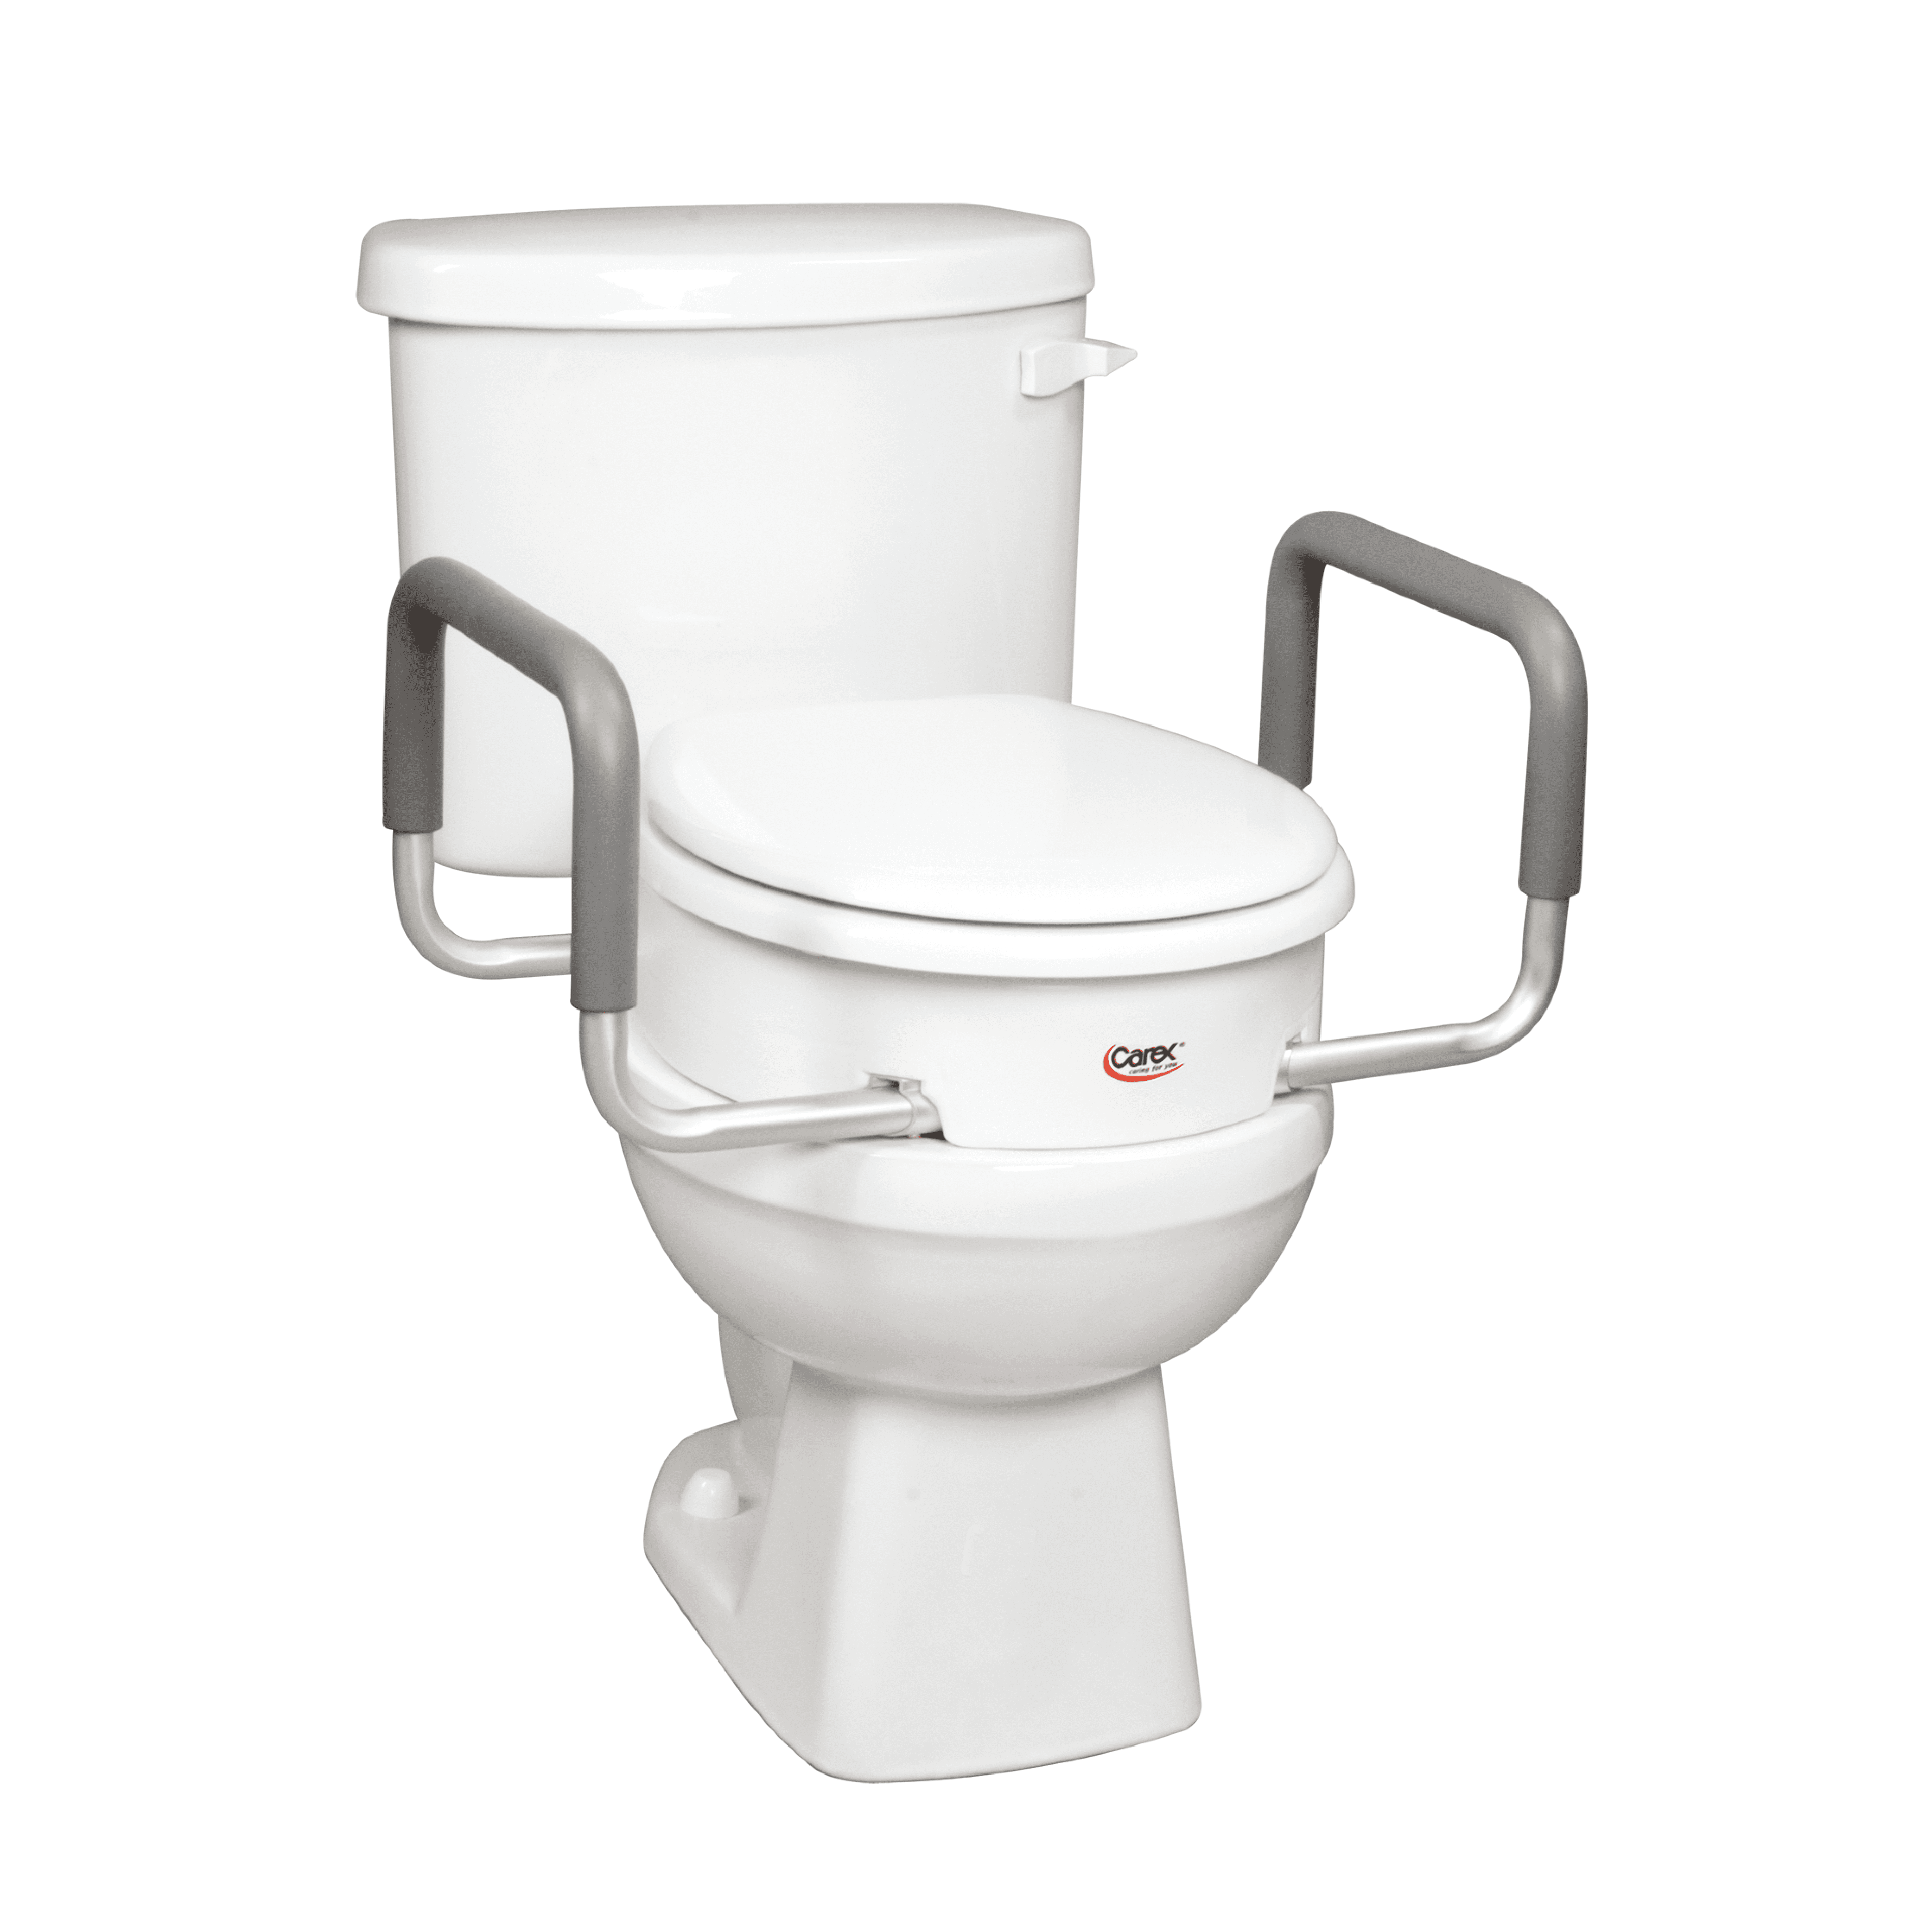 Carex Raised Toilet with Handles, Standard Elongated Toilets, Adds 3.5 Inches to Toilet Height, Toilet Seat Riser for Handicap and Seniors - Walmart.com